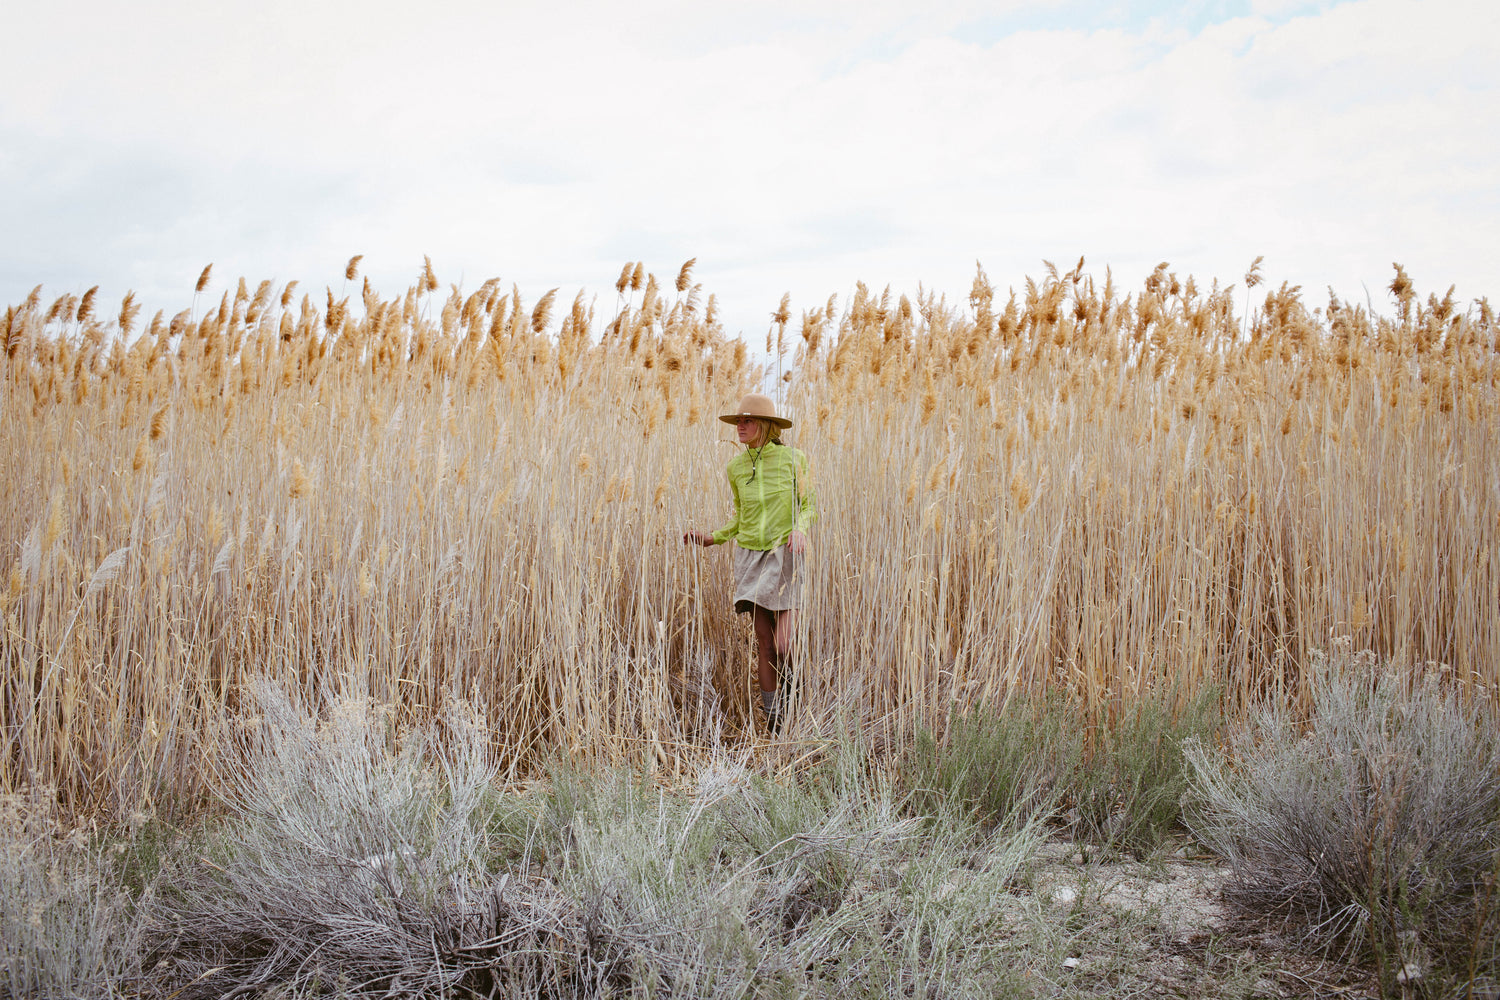 person exiting high a field of high grass, wearing a beige skirt, neon yellow windbreaker and felt hat